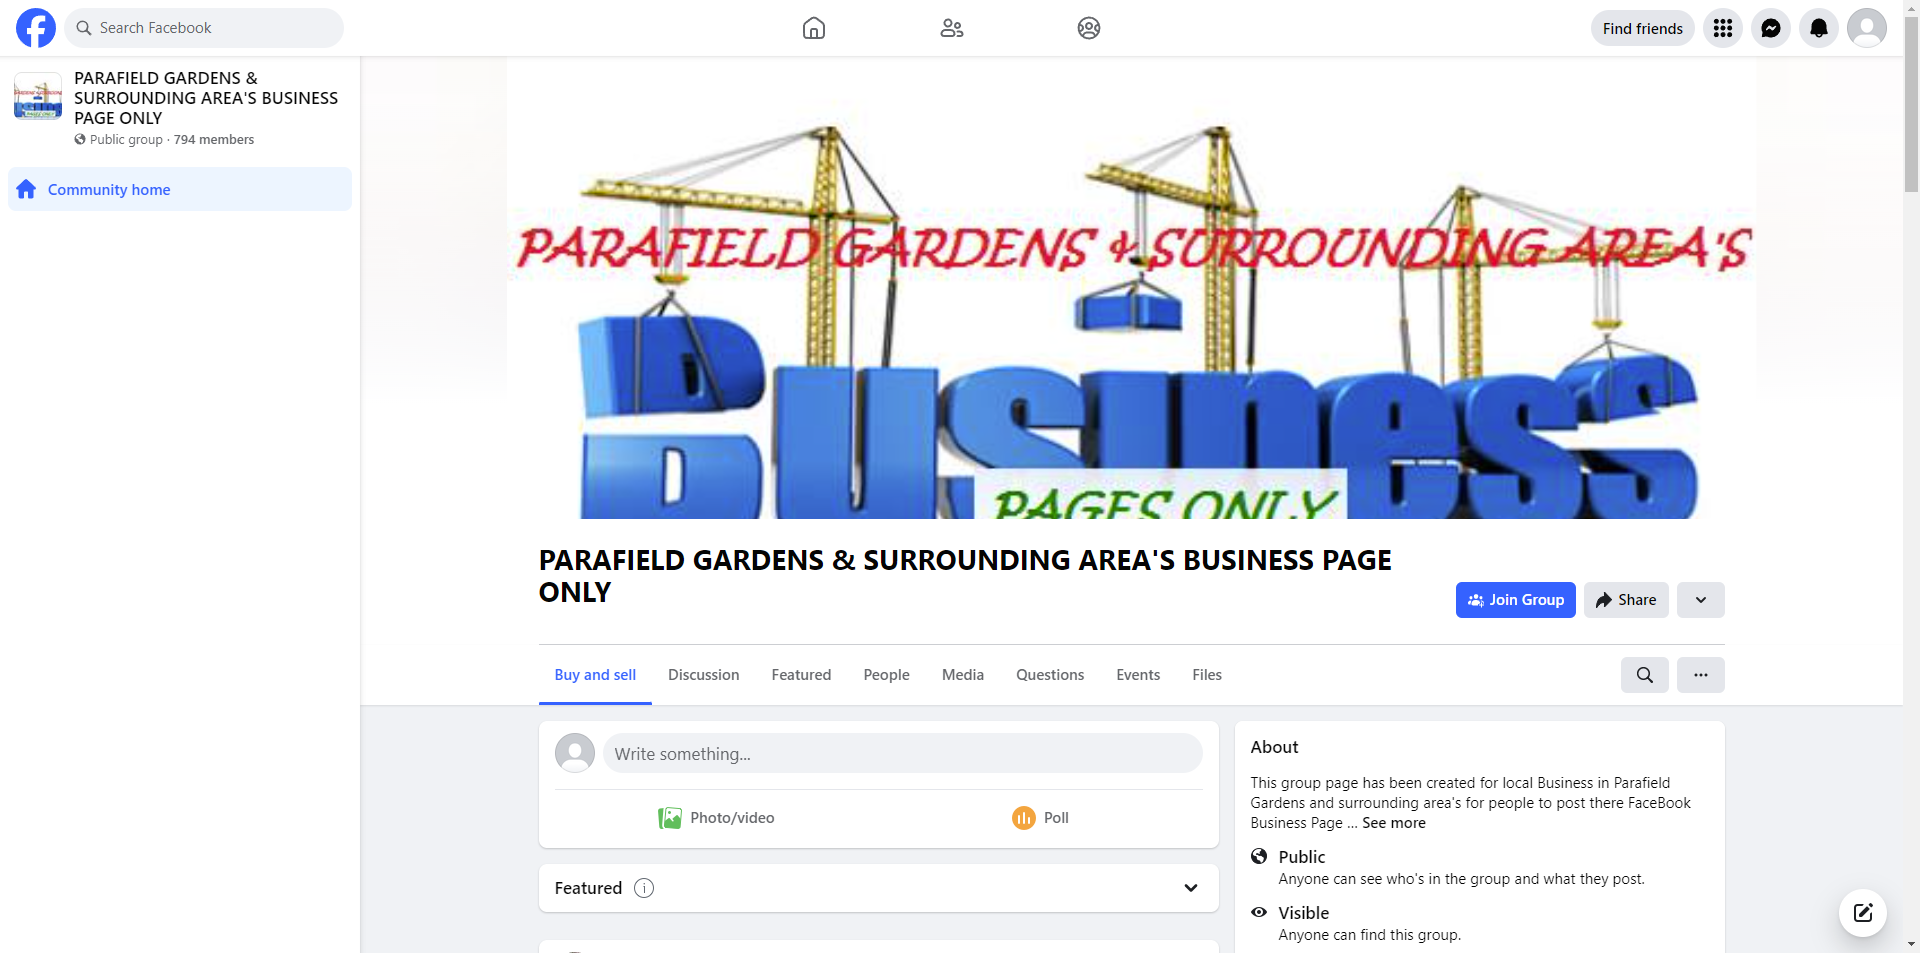 Parafield Gardens & Surrounding Areas Business Page Only